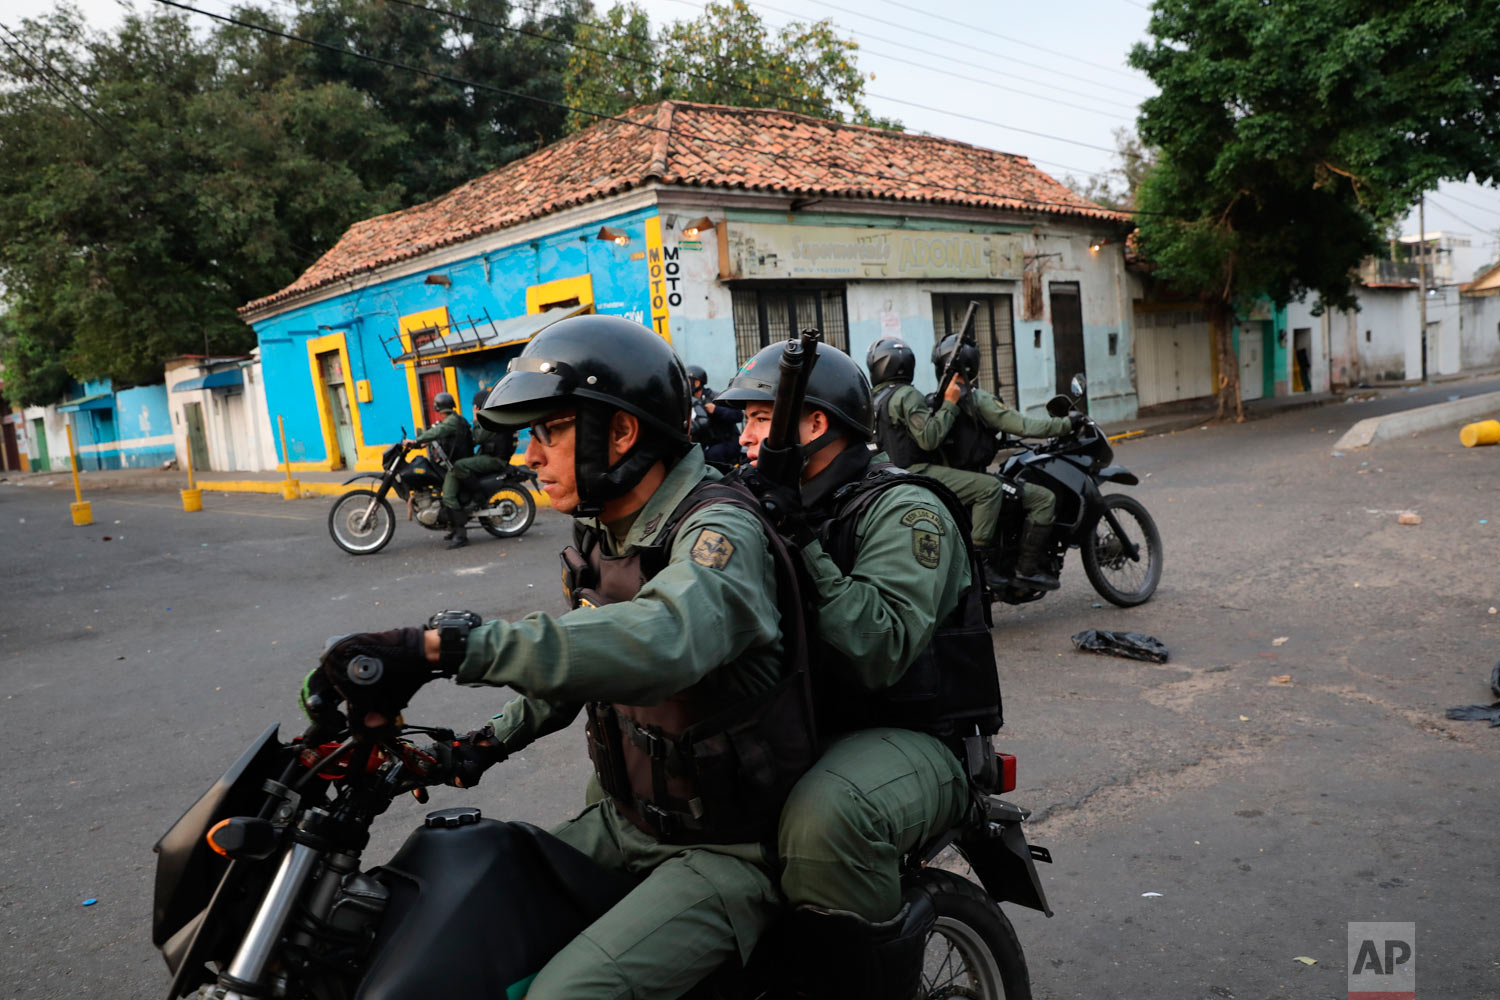  Venezuelan Bolivarian National Guards patrol on motorcycles clashes with protesters in Urena, Venezuela, near the border with Colombia, Saturday, Feb. 23, 2019. (AP Photo/Rodrigo Abd) 